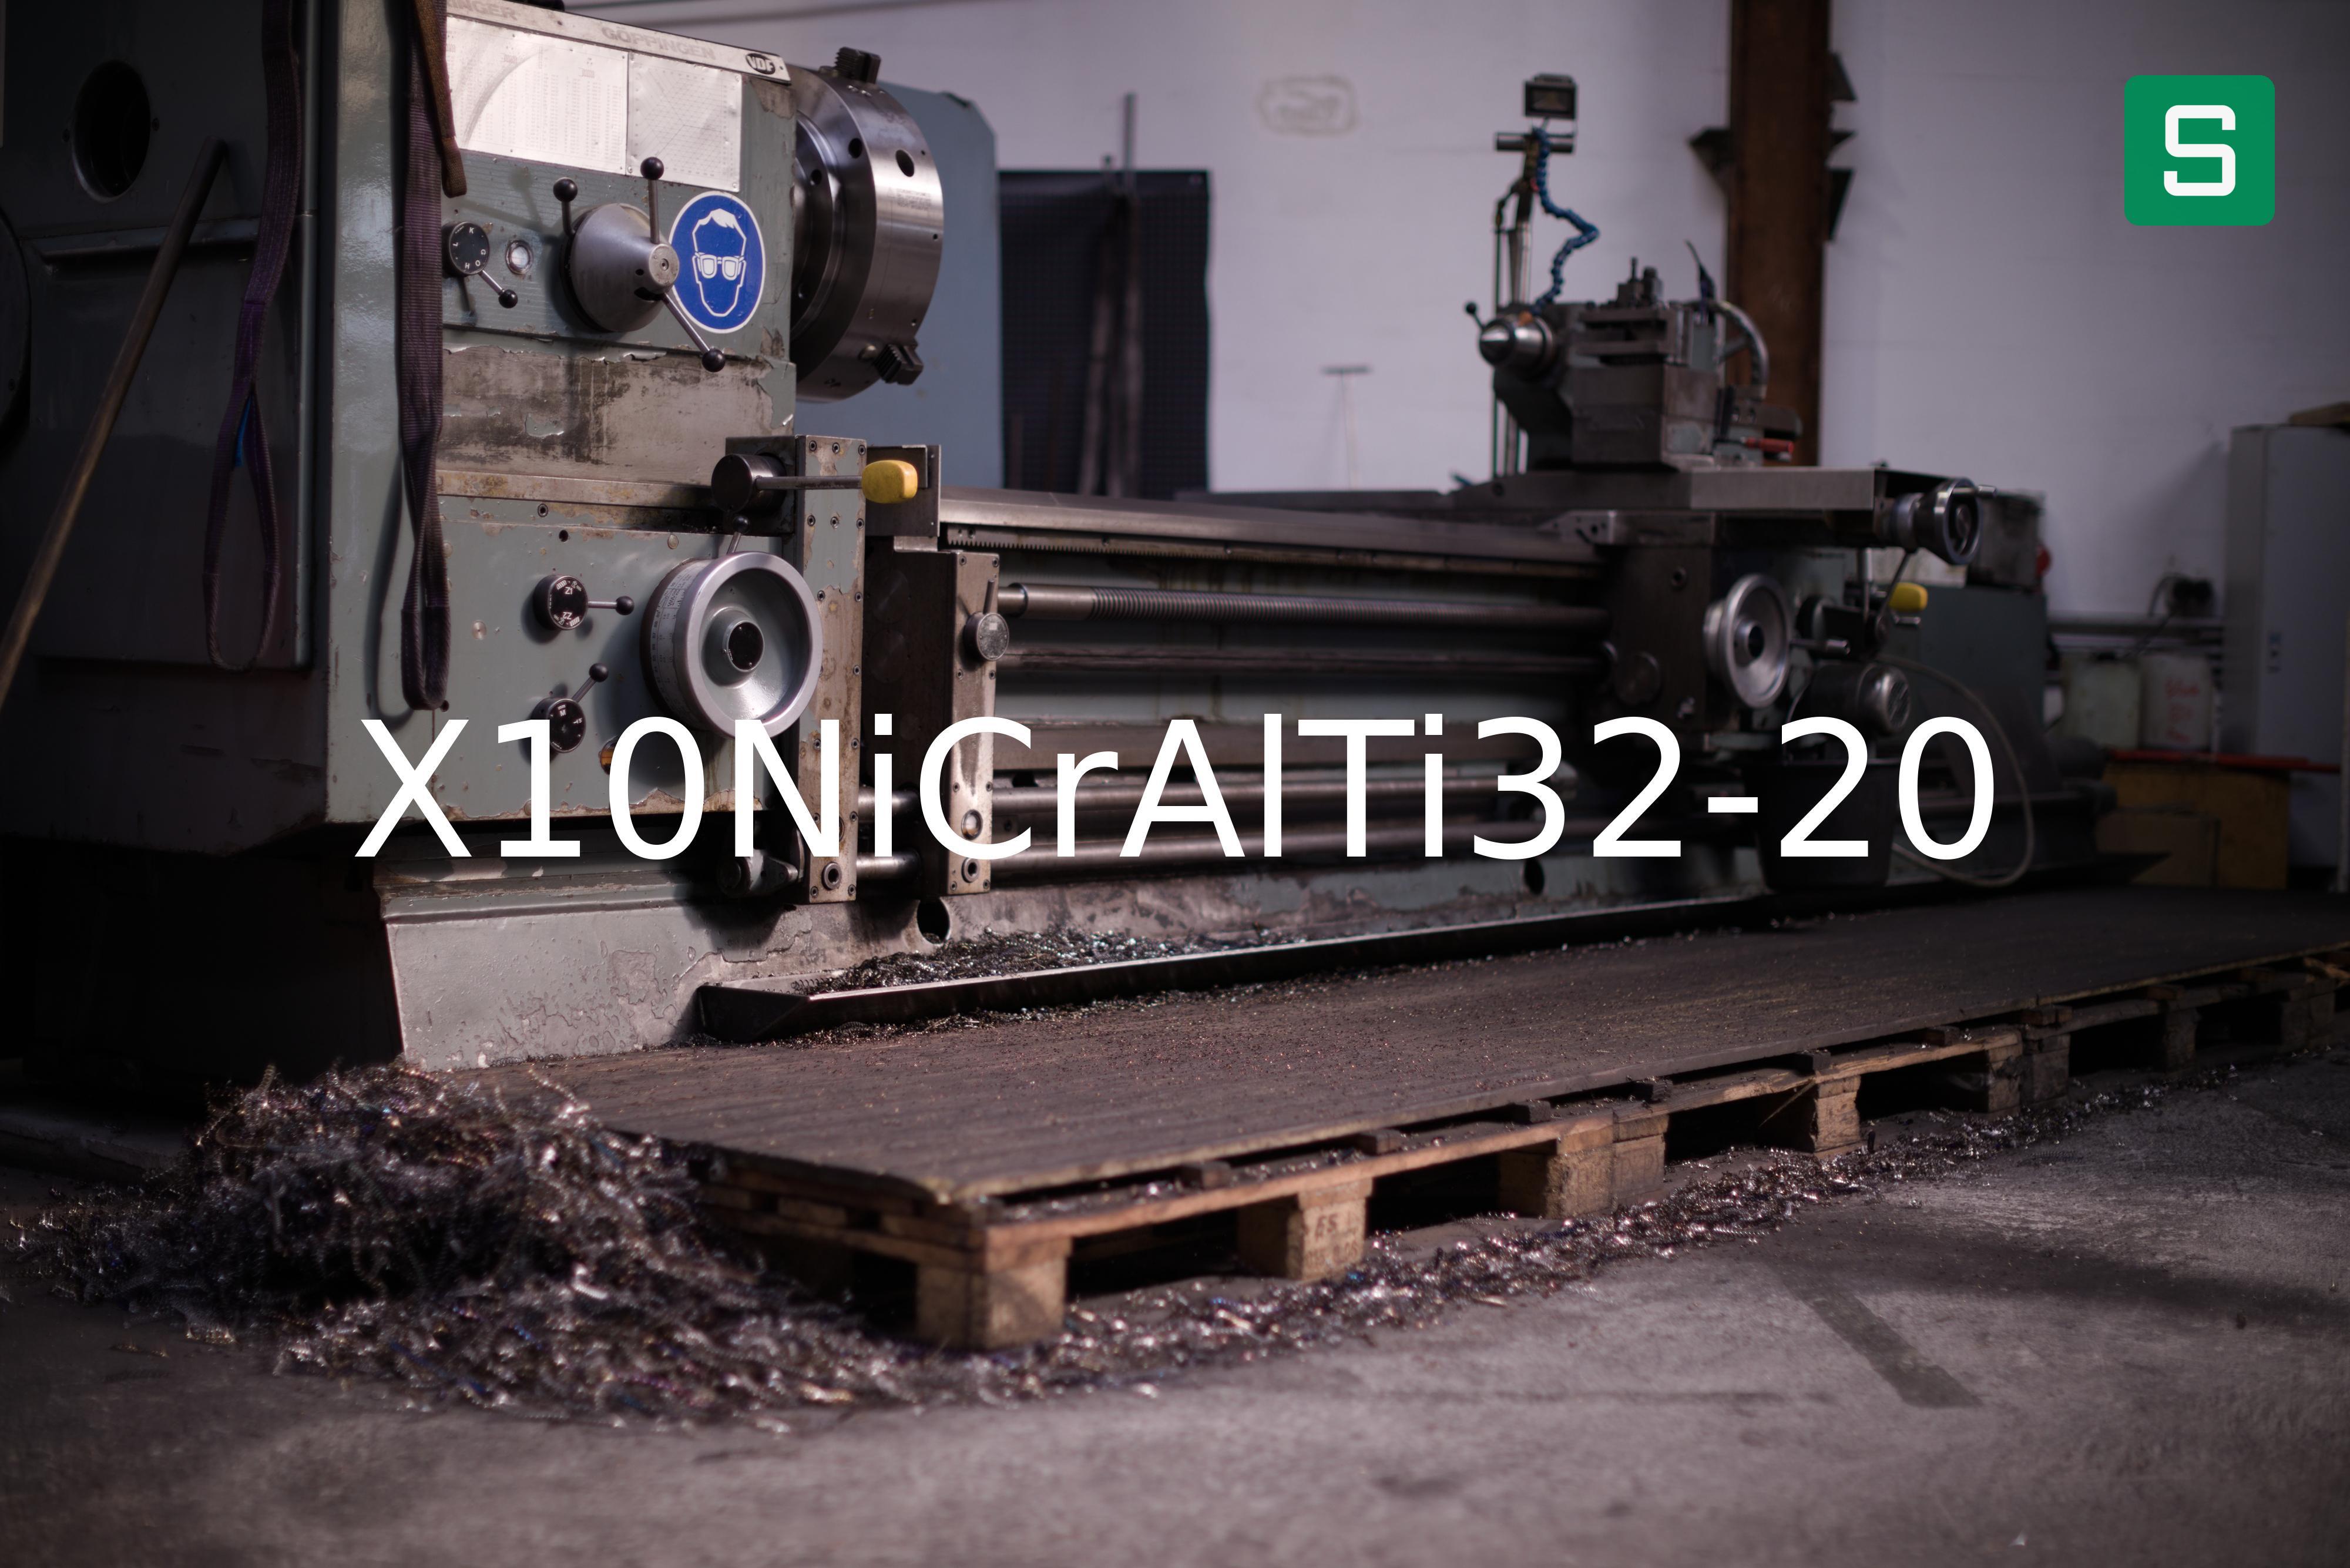 Steel Material: X10NiCrAlTi32-20